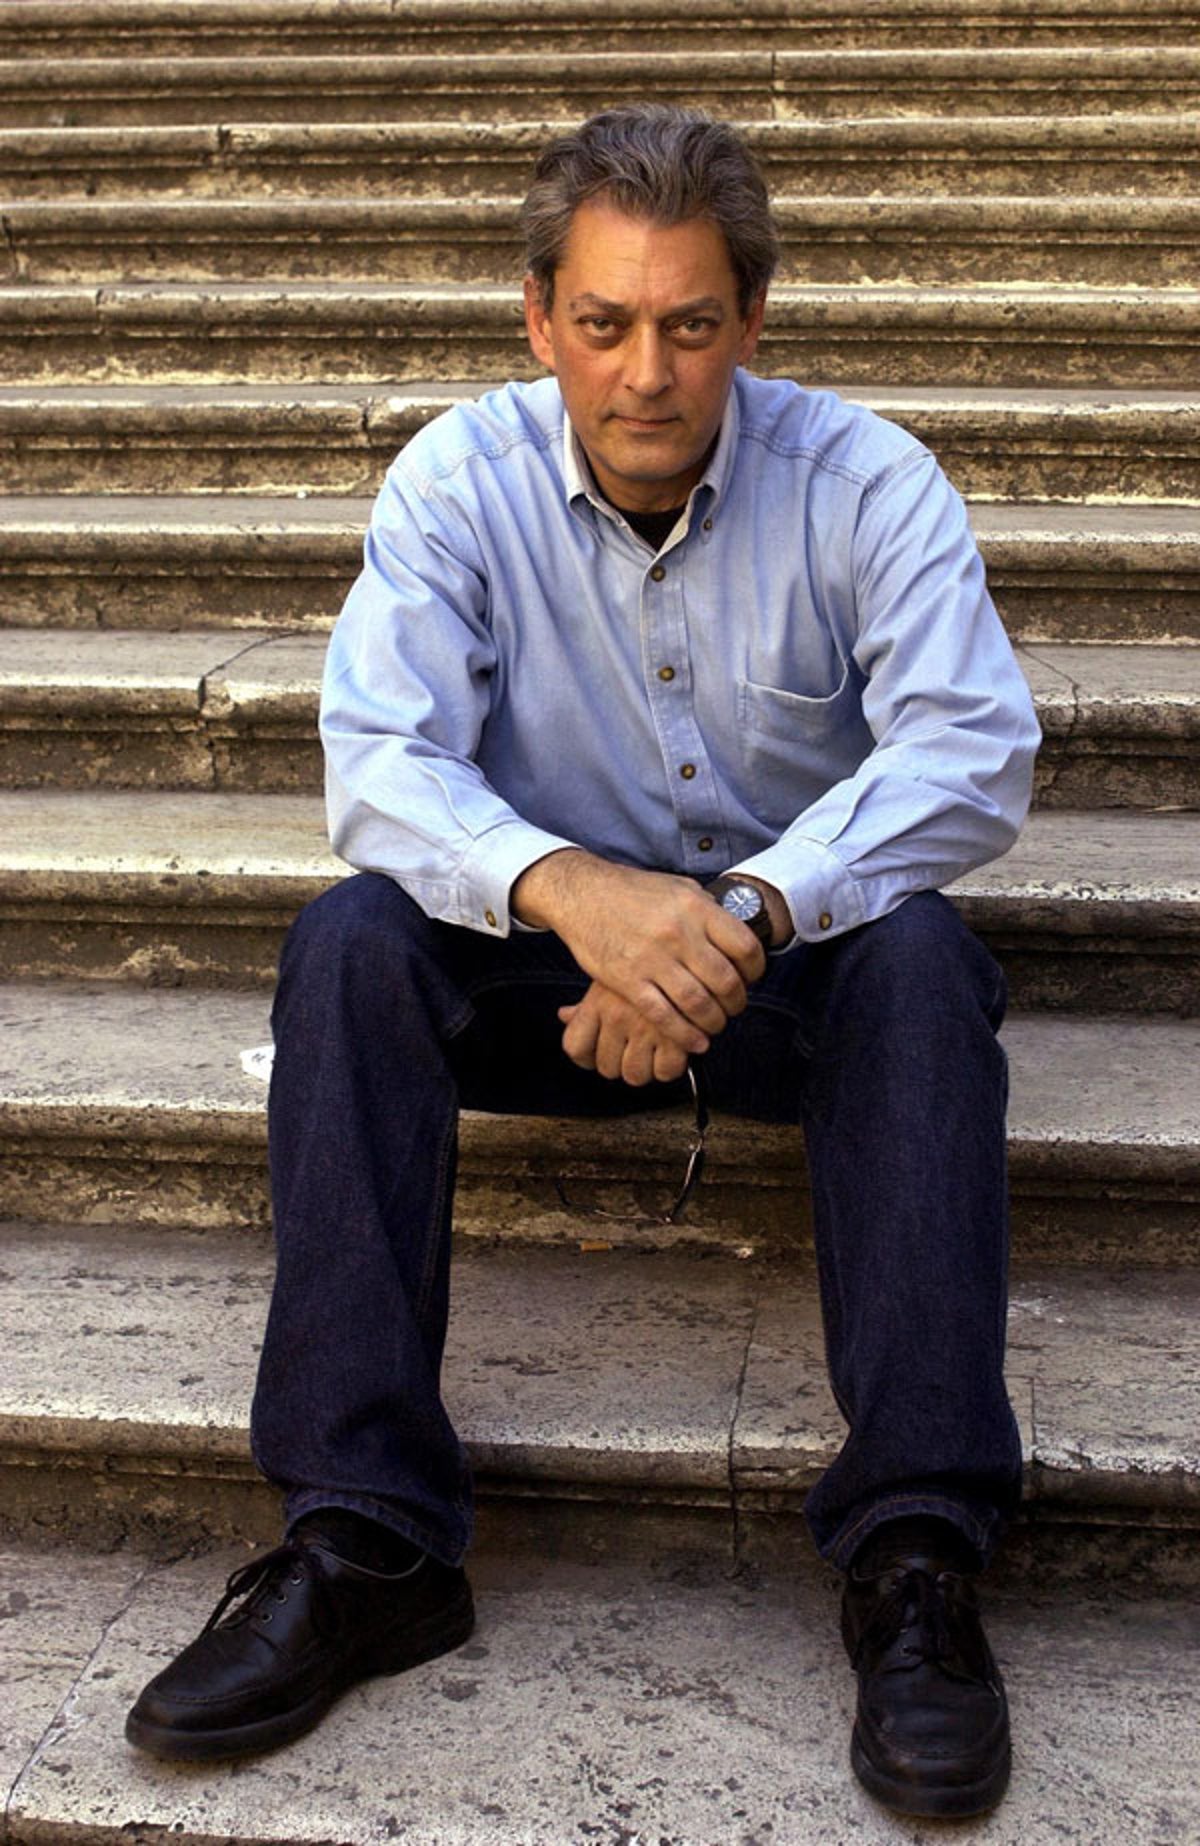 Innocence of youth: How Paul Auster excavated his own past for his latest  novel, The Independent